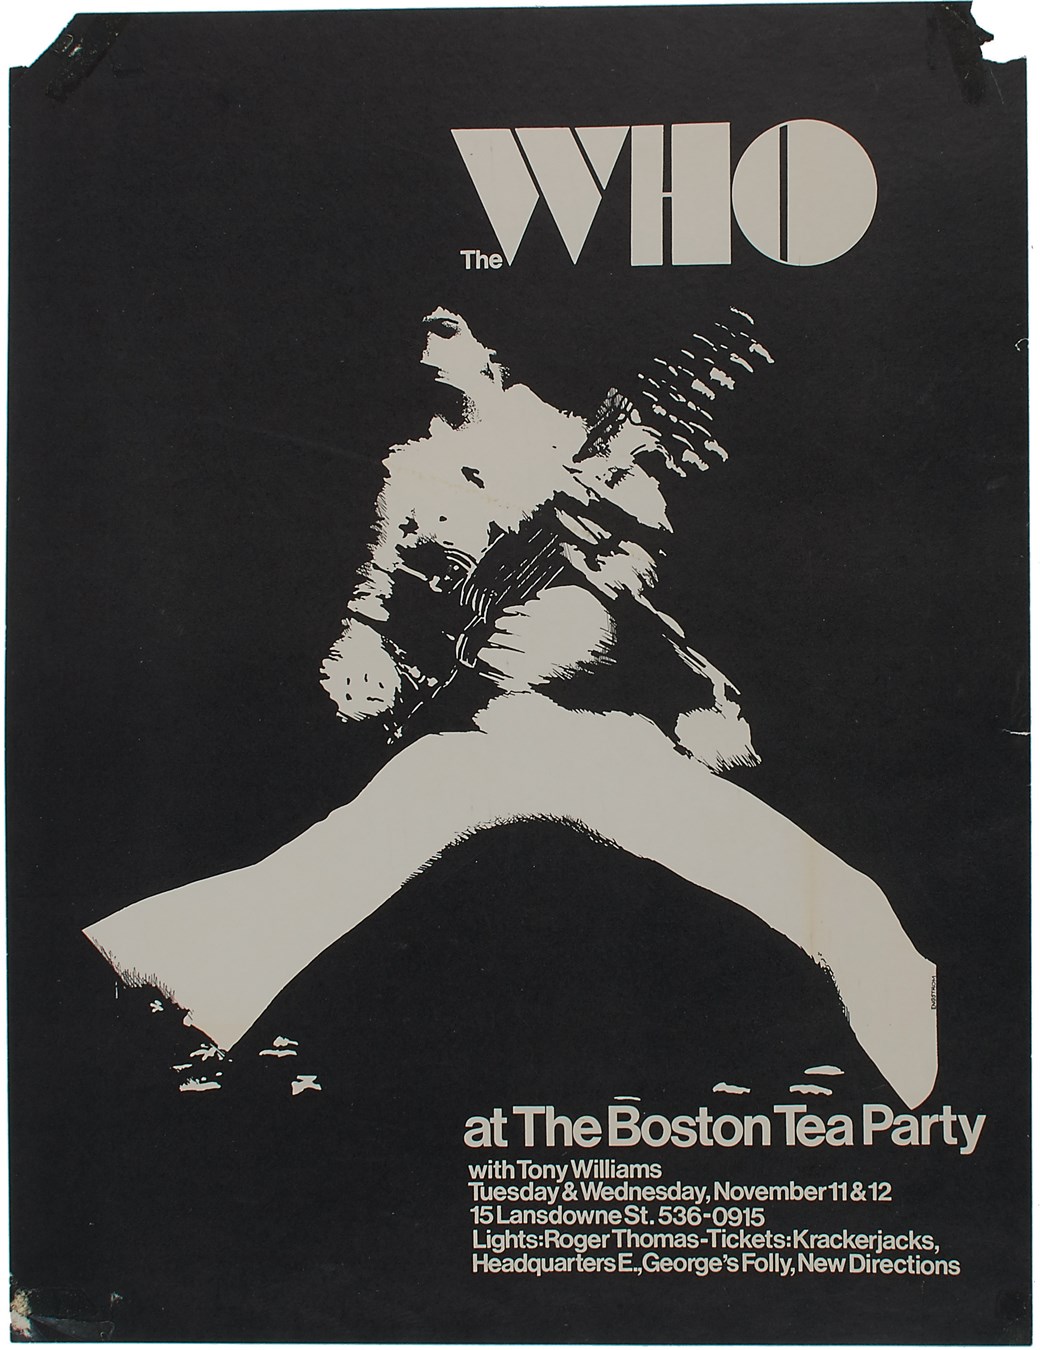 Rock 'N' Roll - Rare "The Who" at Boston Tea Party Boxing-Style Poster - Classic Townsend Image